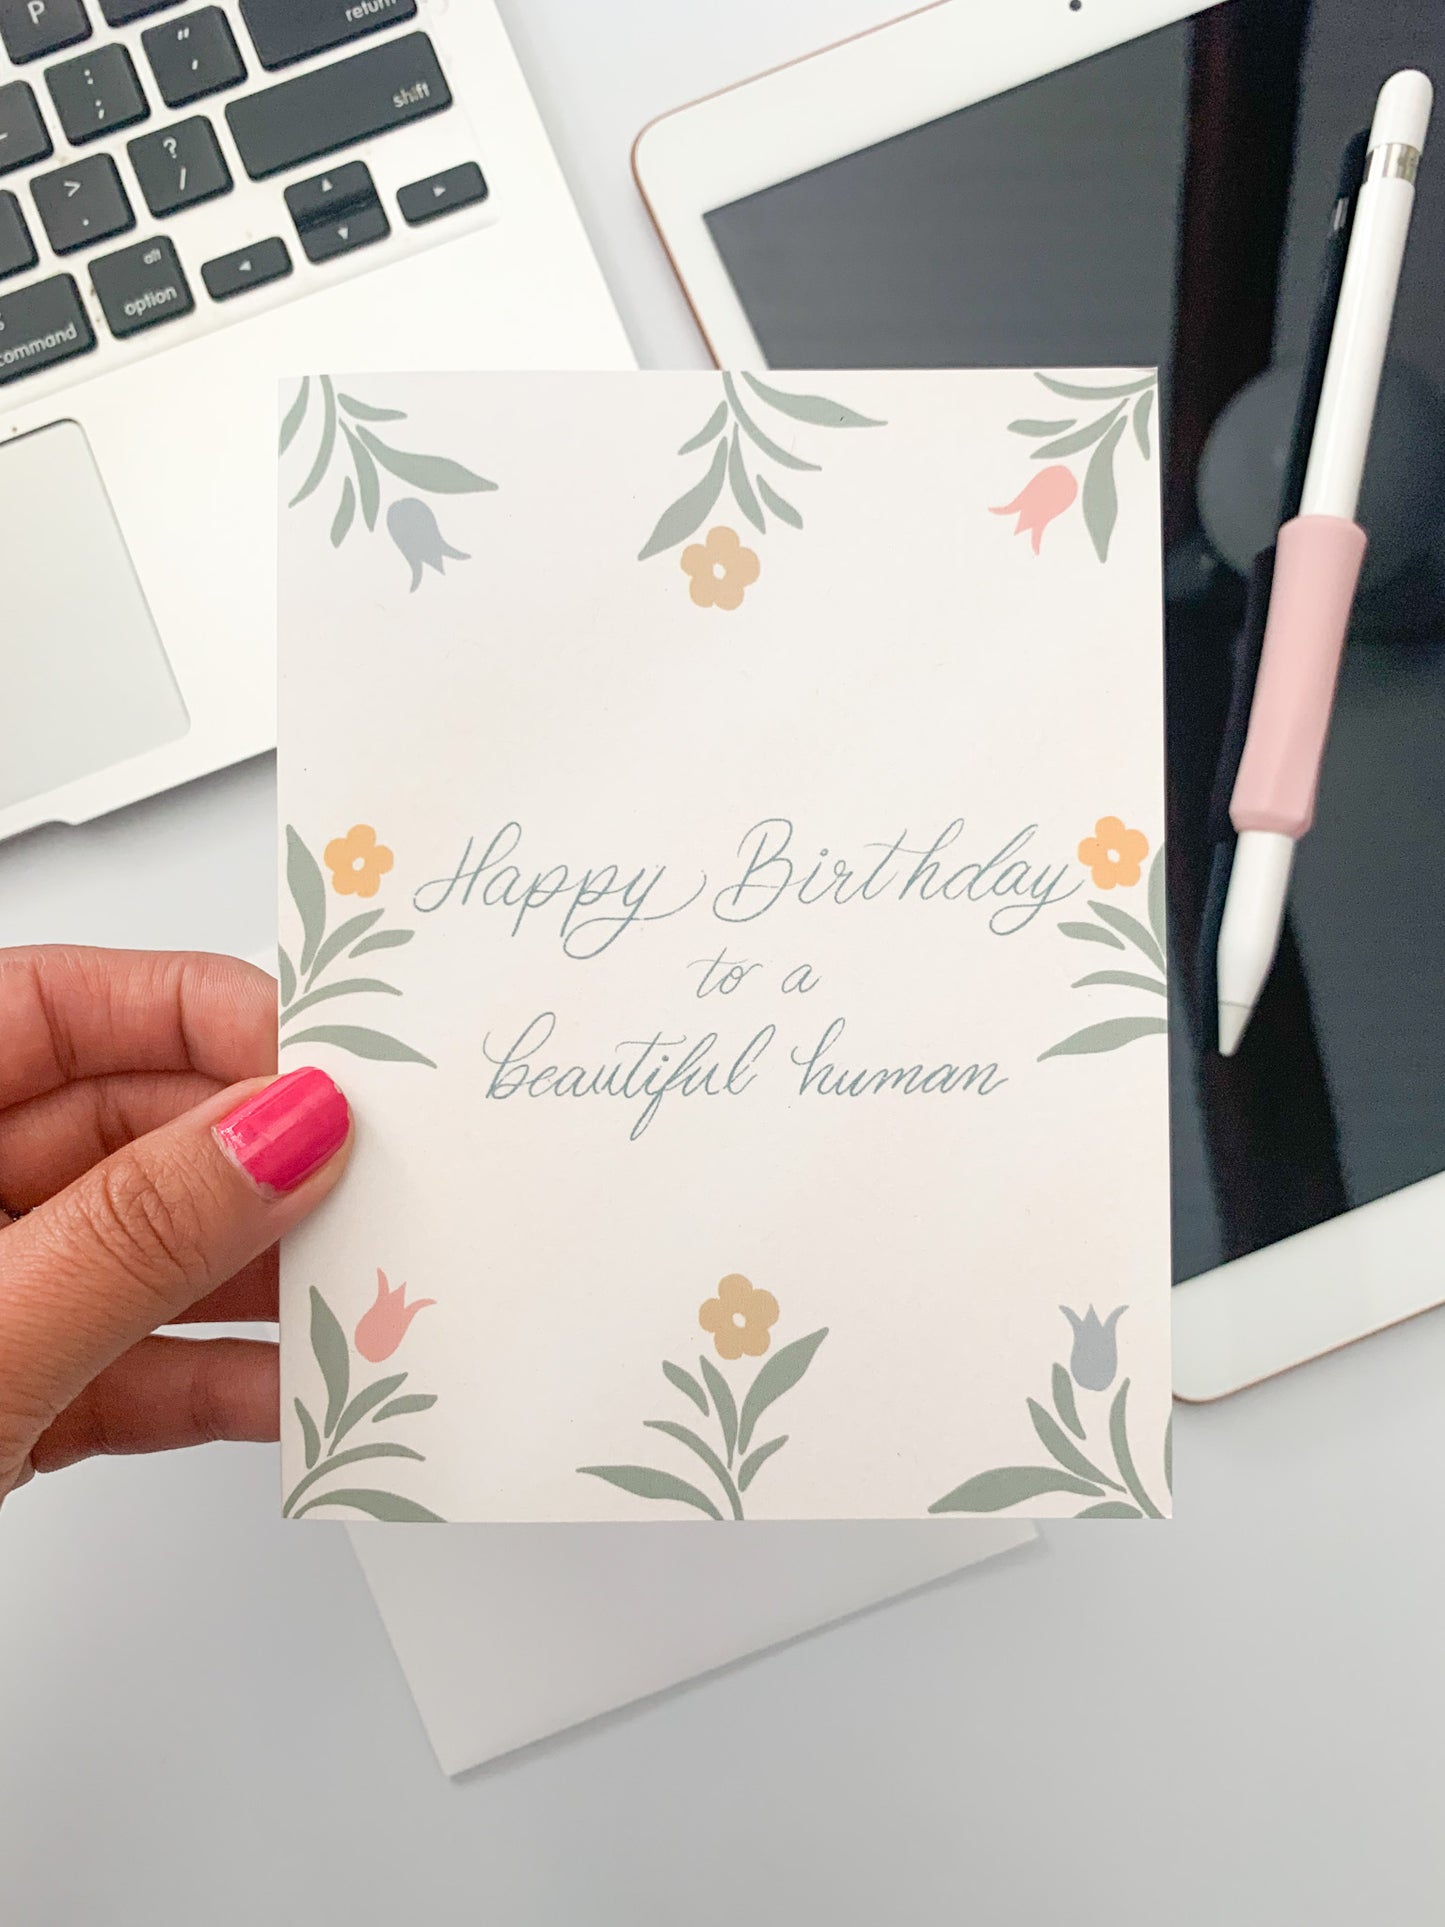 Sweet Happy Birthday card for friend with flowers